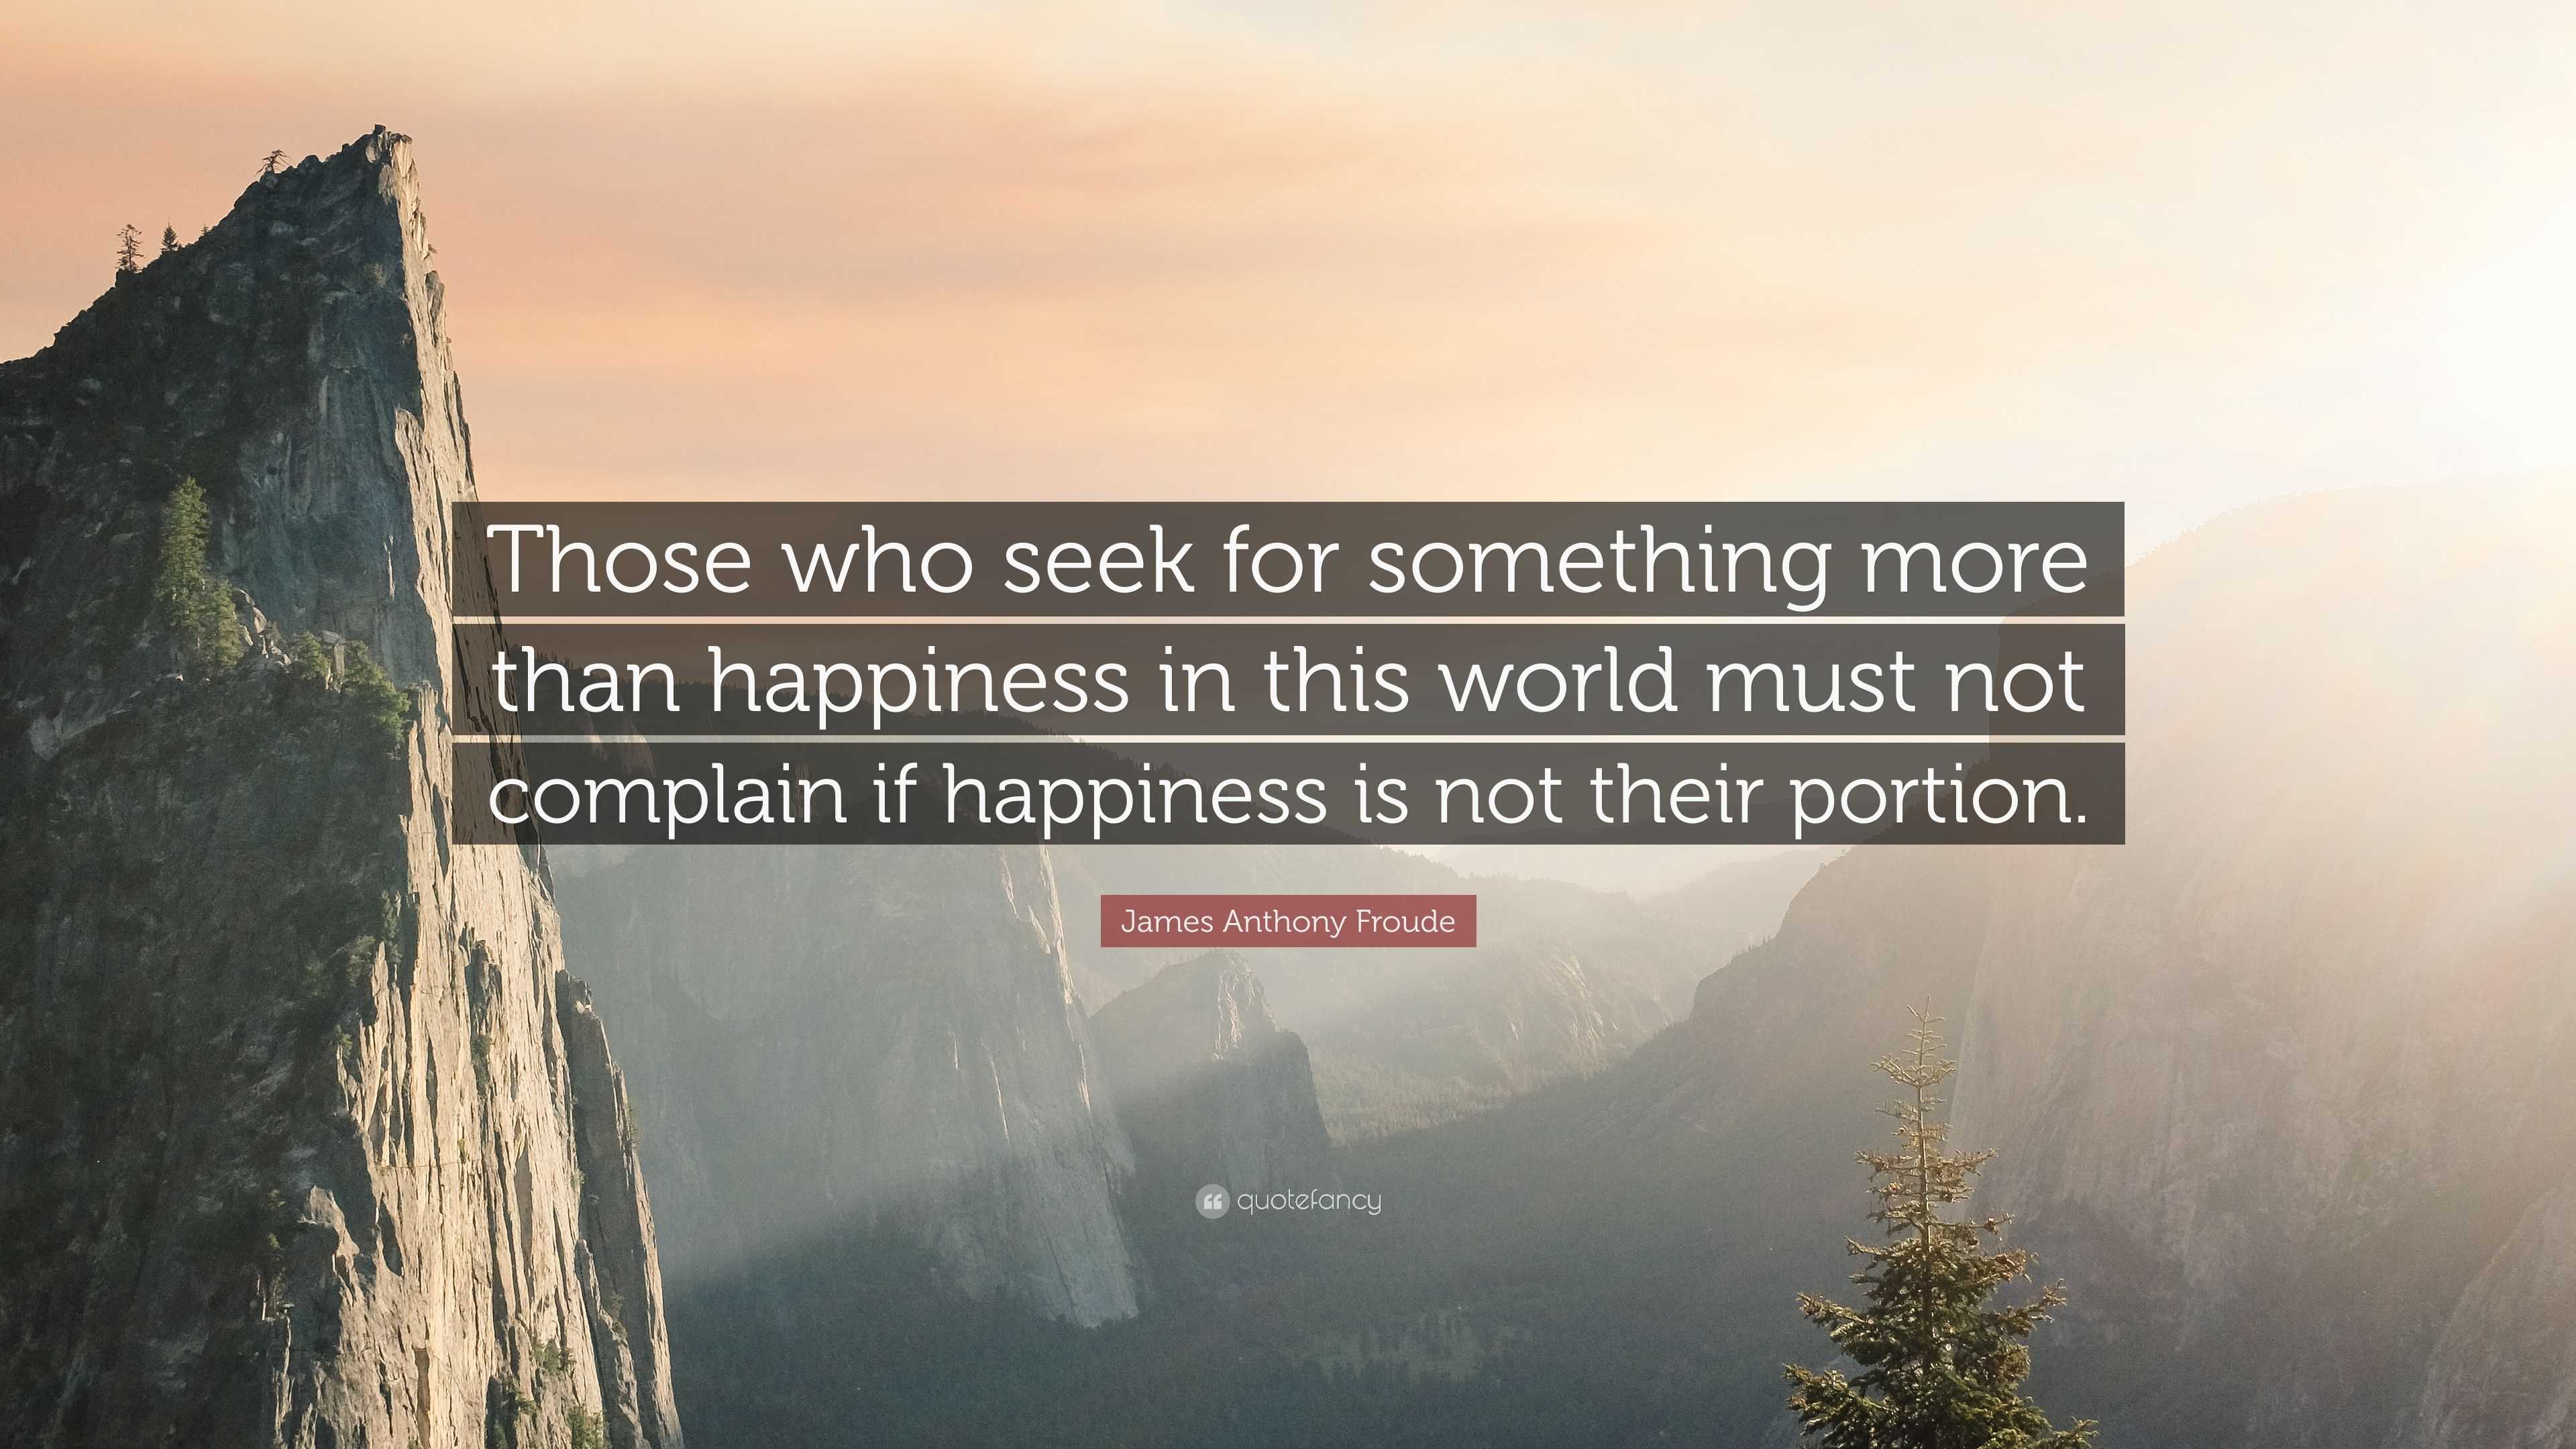 James Anthony Froude Quote: “Those who seek for something more than ...